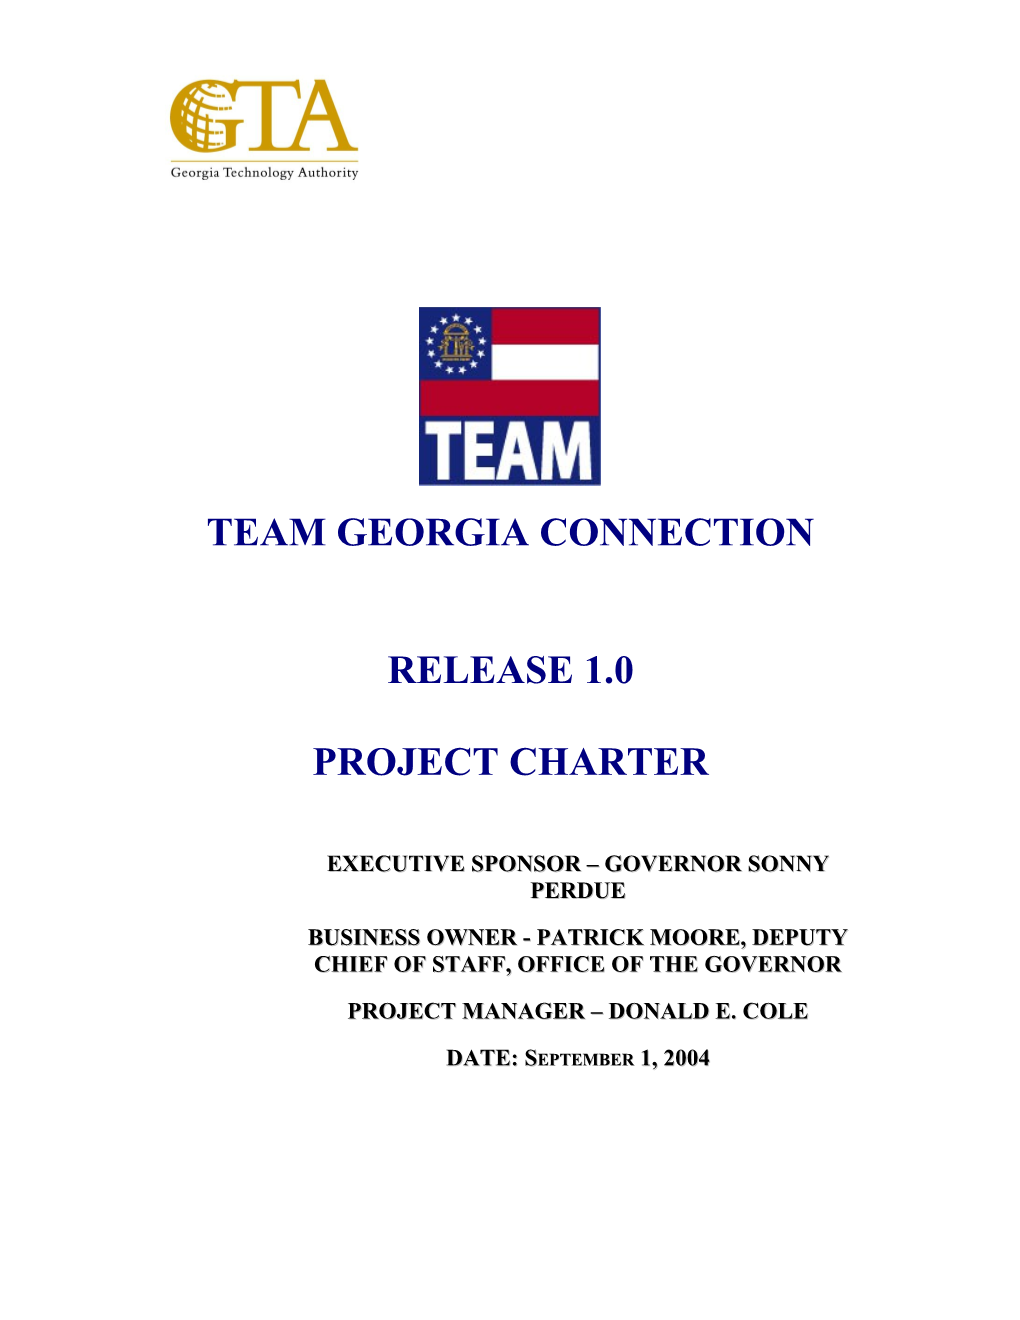 Project Charter - Team Georgia Connection